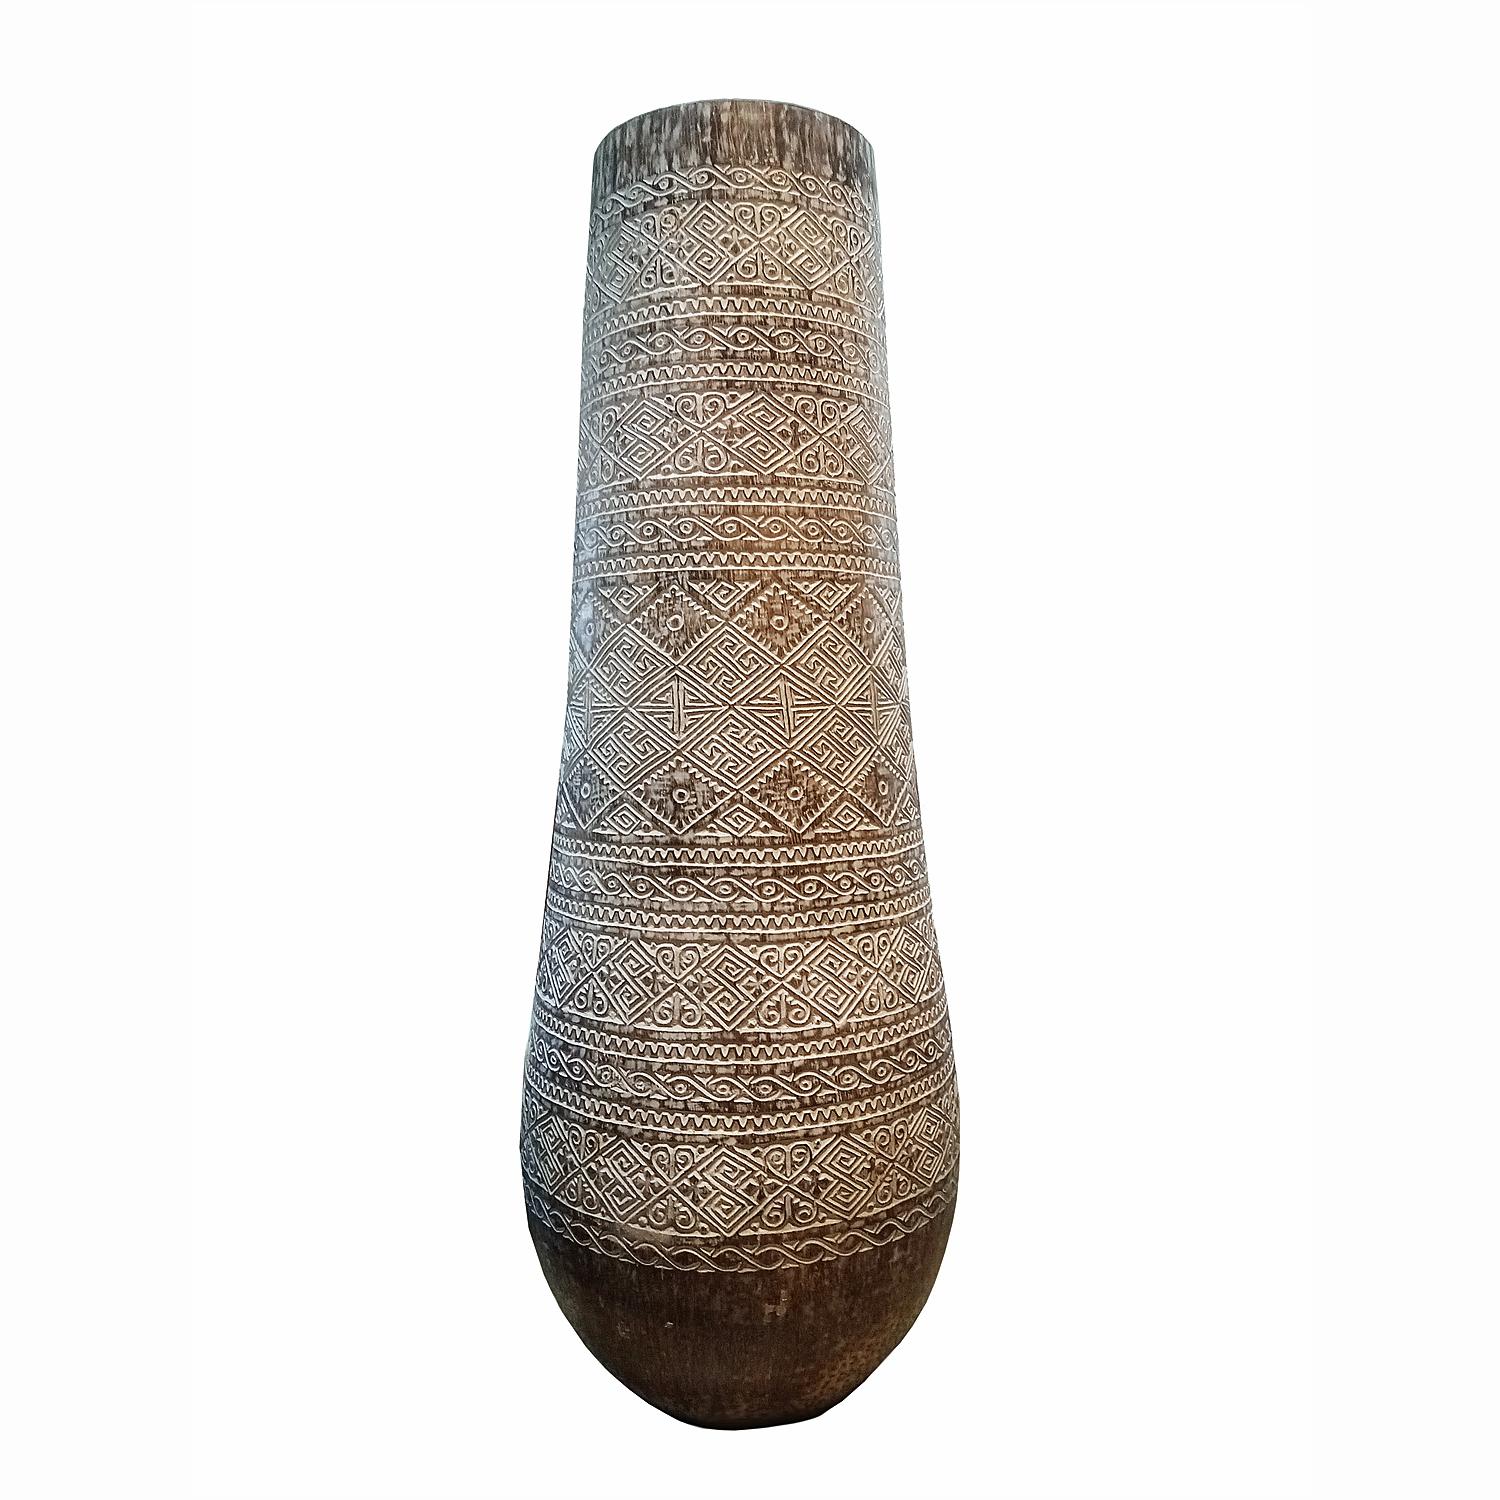 Tall Hand-Carved Palm Pot im Zustand „Gut“ im Angebot in New York, NY